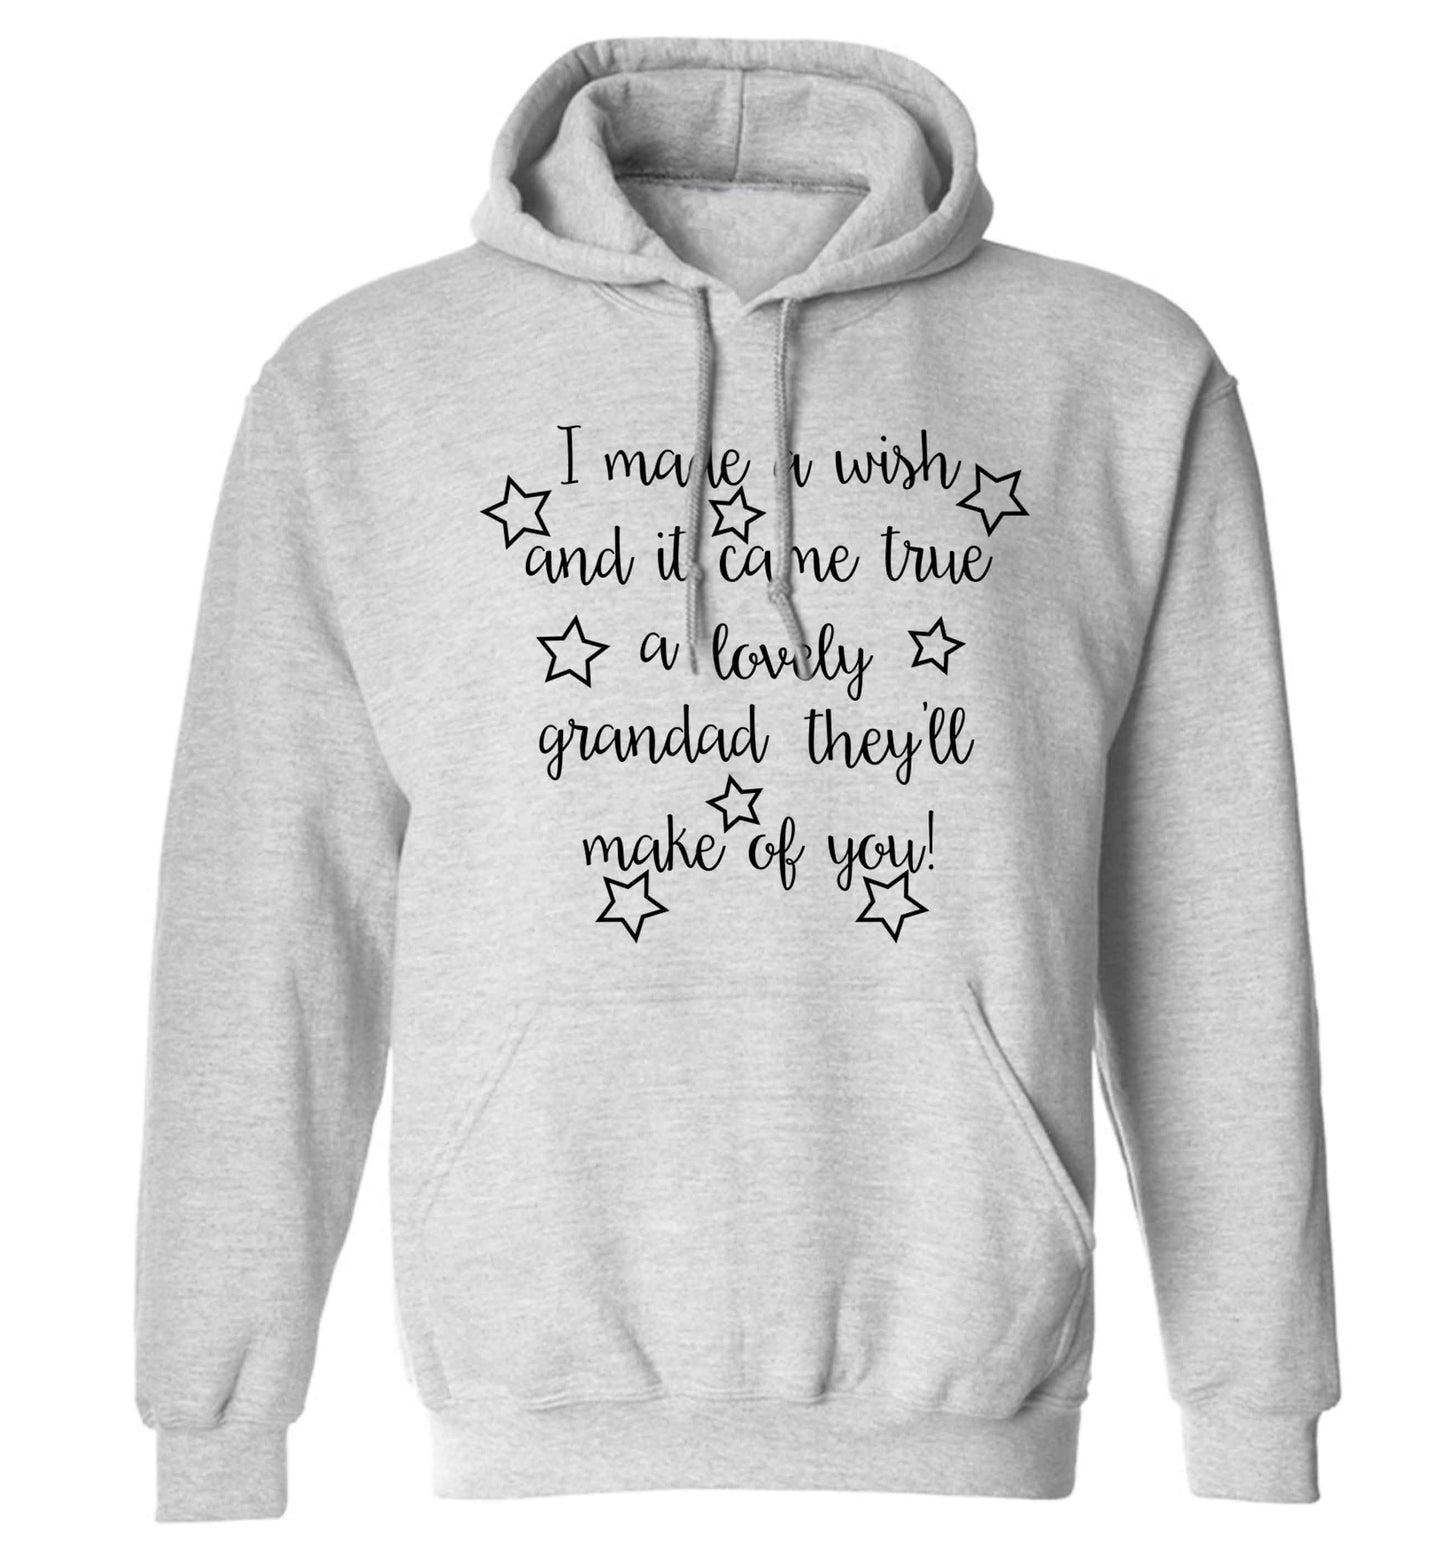 I made a wish and it came true a lovely grandad they'll make of you! adults unisex grey hoodie 2XL